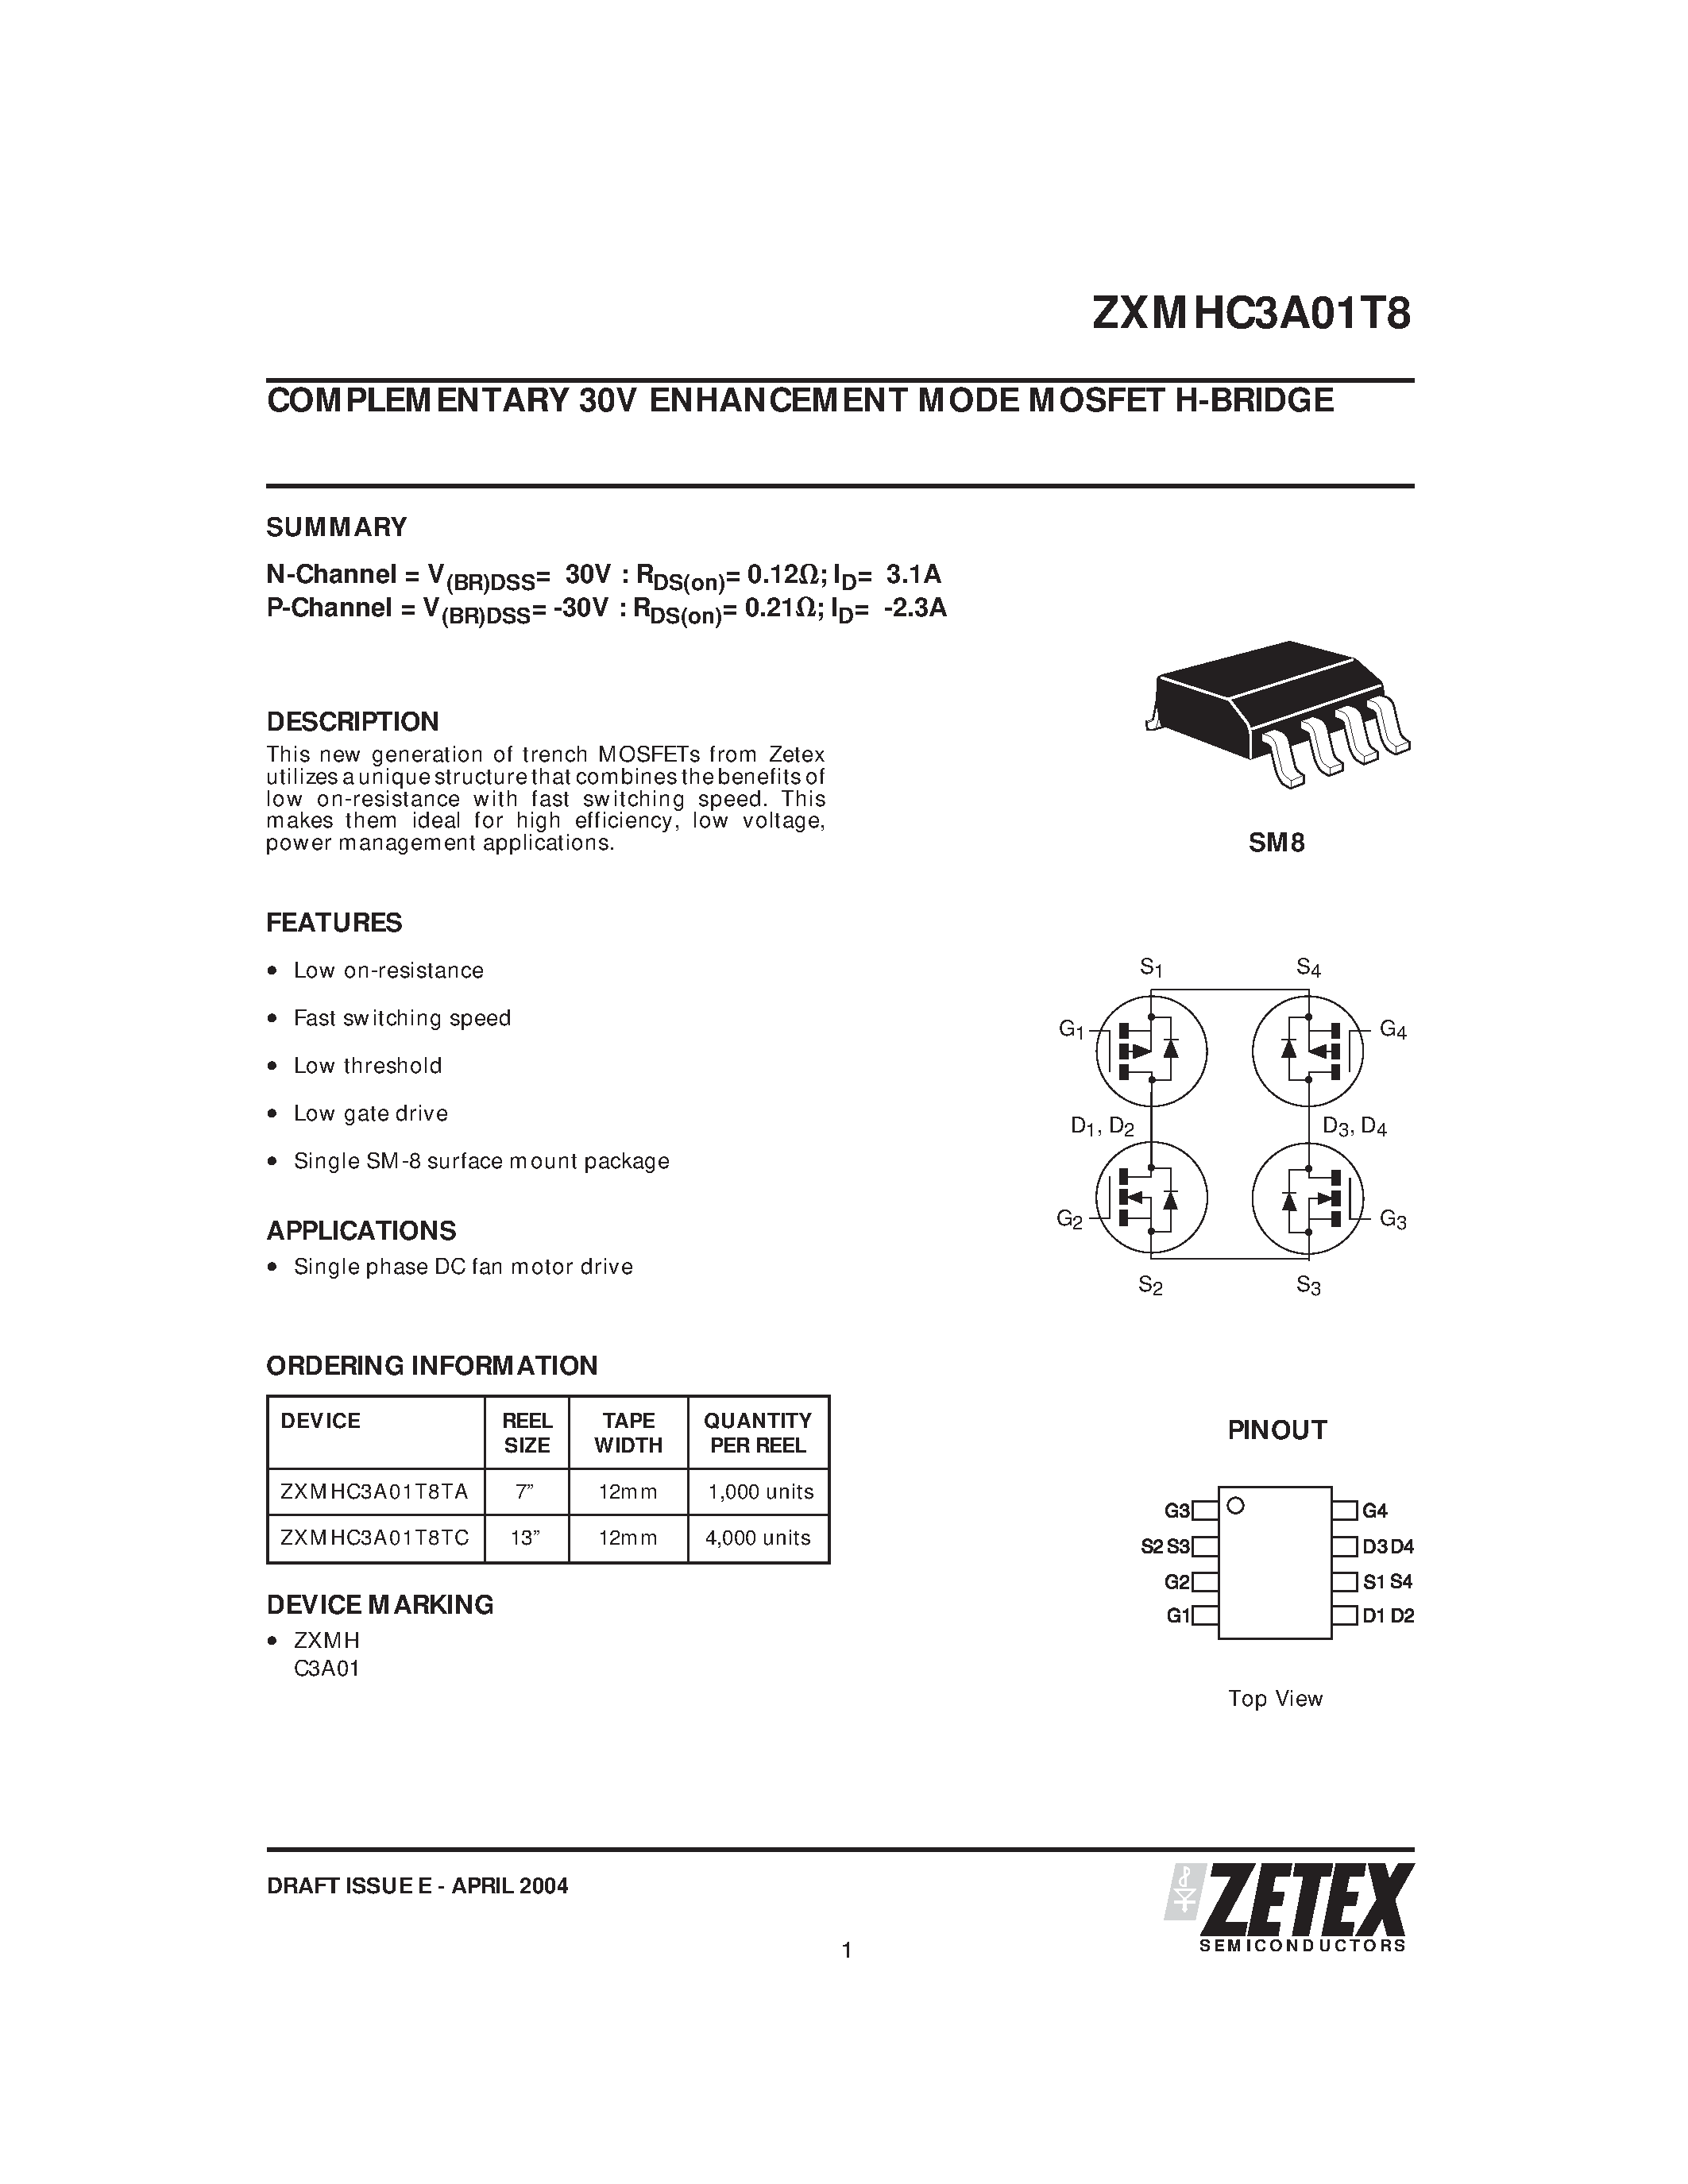 Datasheet ZXMHC3A01T8 - COMPLEMENTARY 30V ENHANCEMENT MODE MOSFET H-BRIDGE page 1